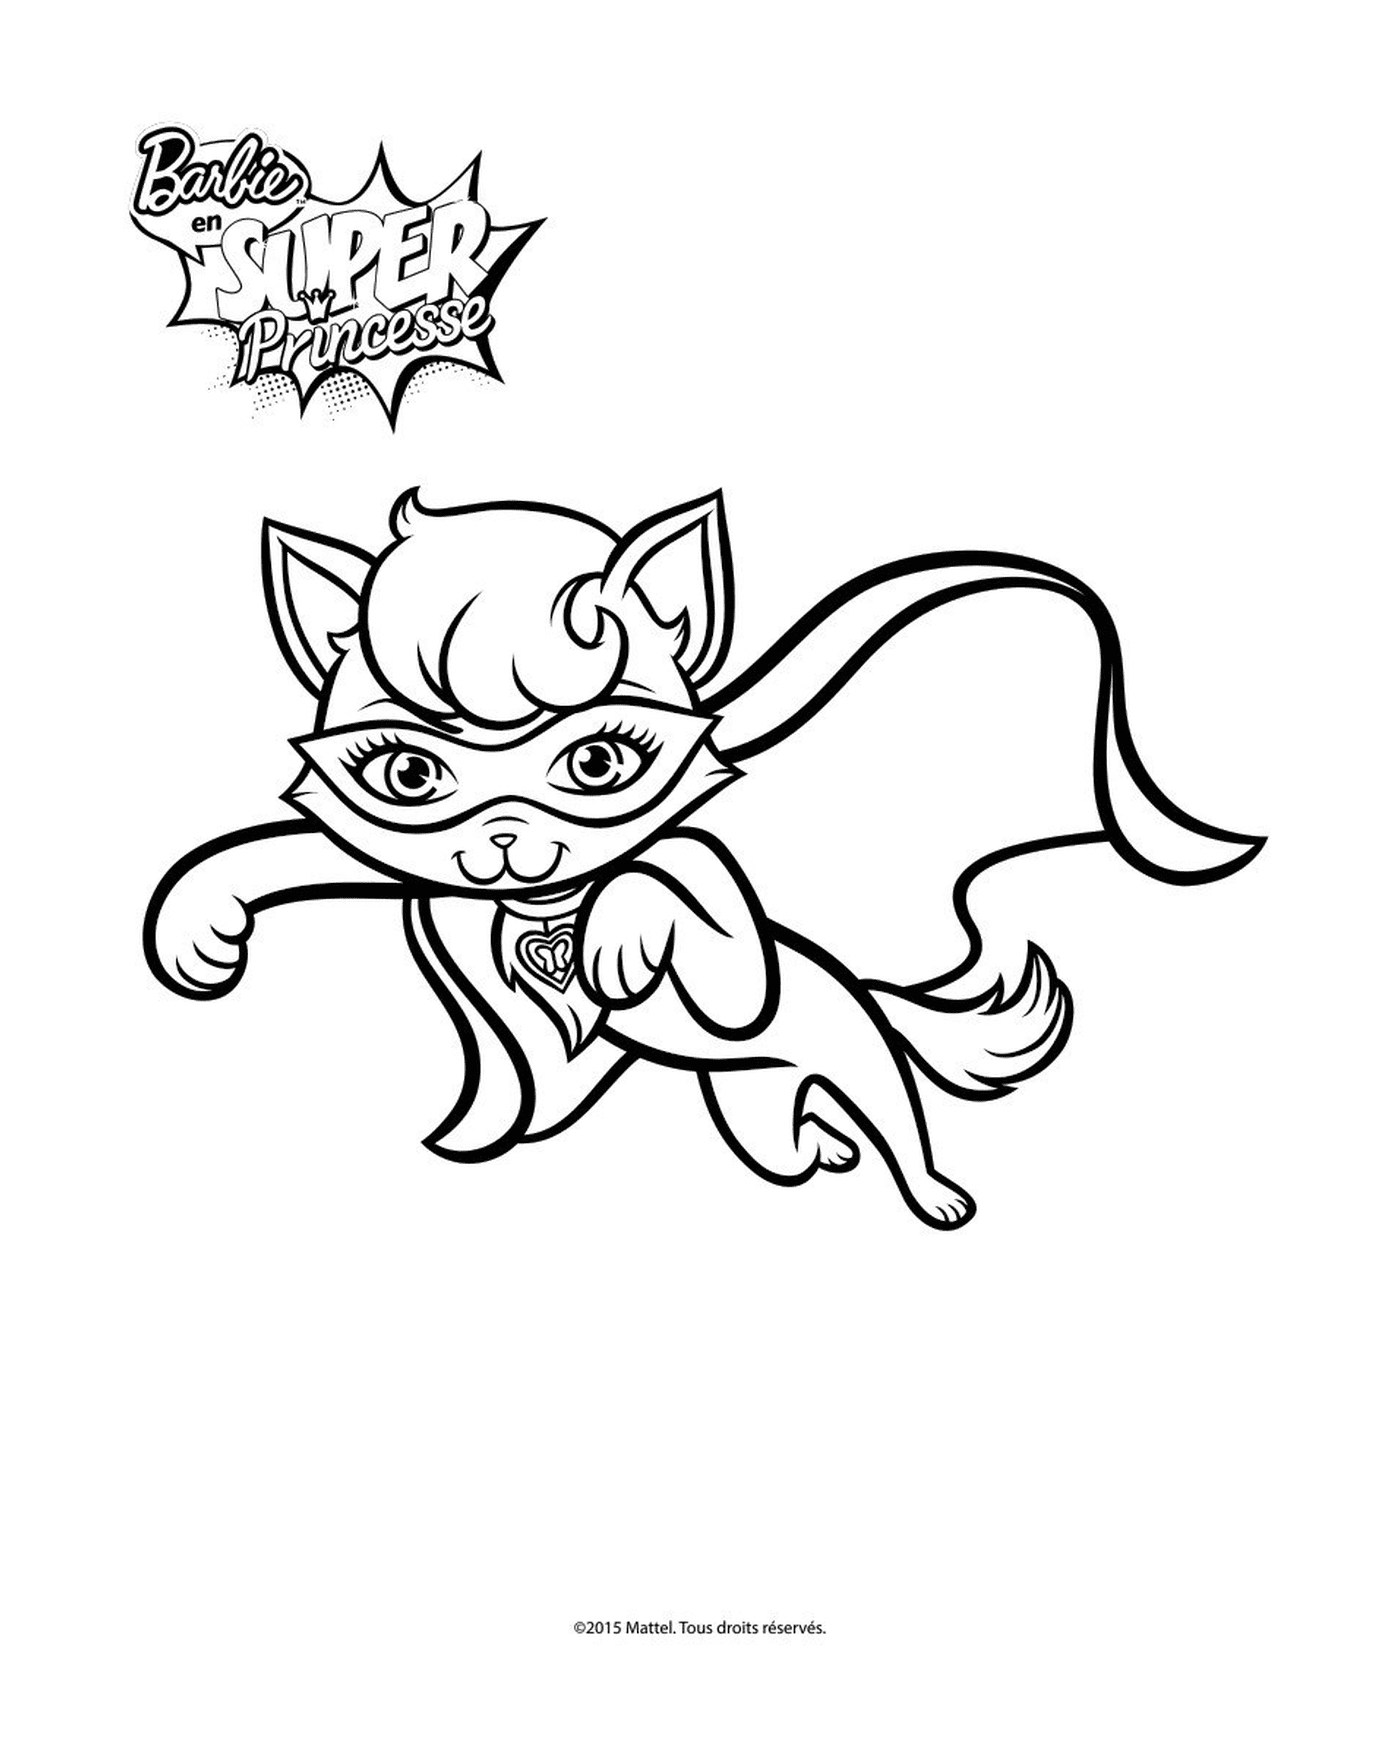  An image of a cat disguised as a superhero 